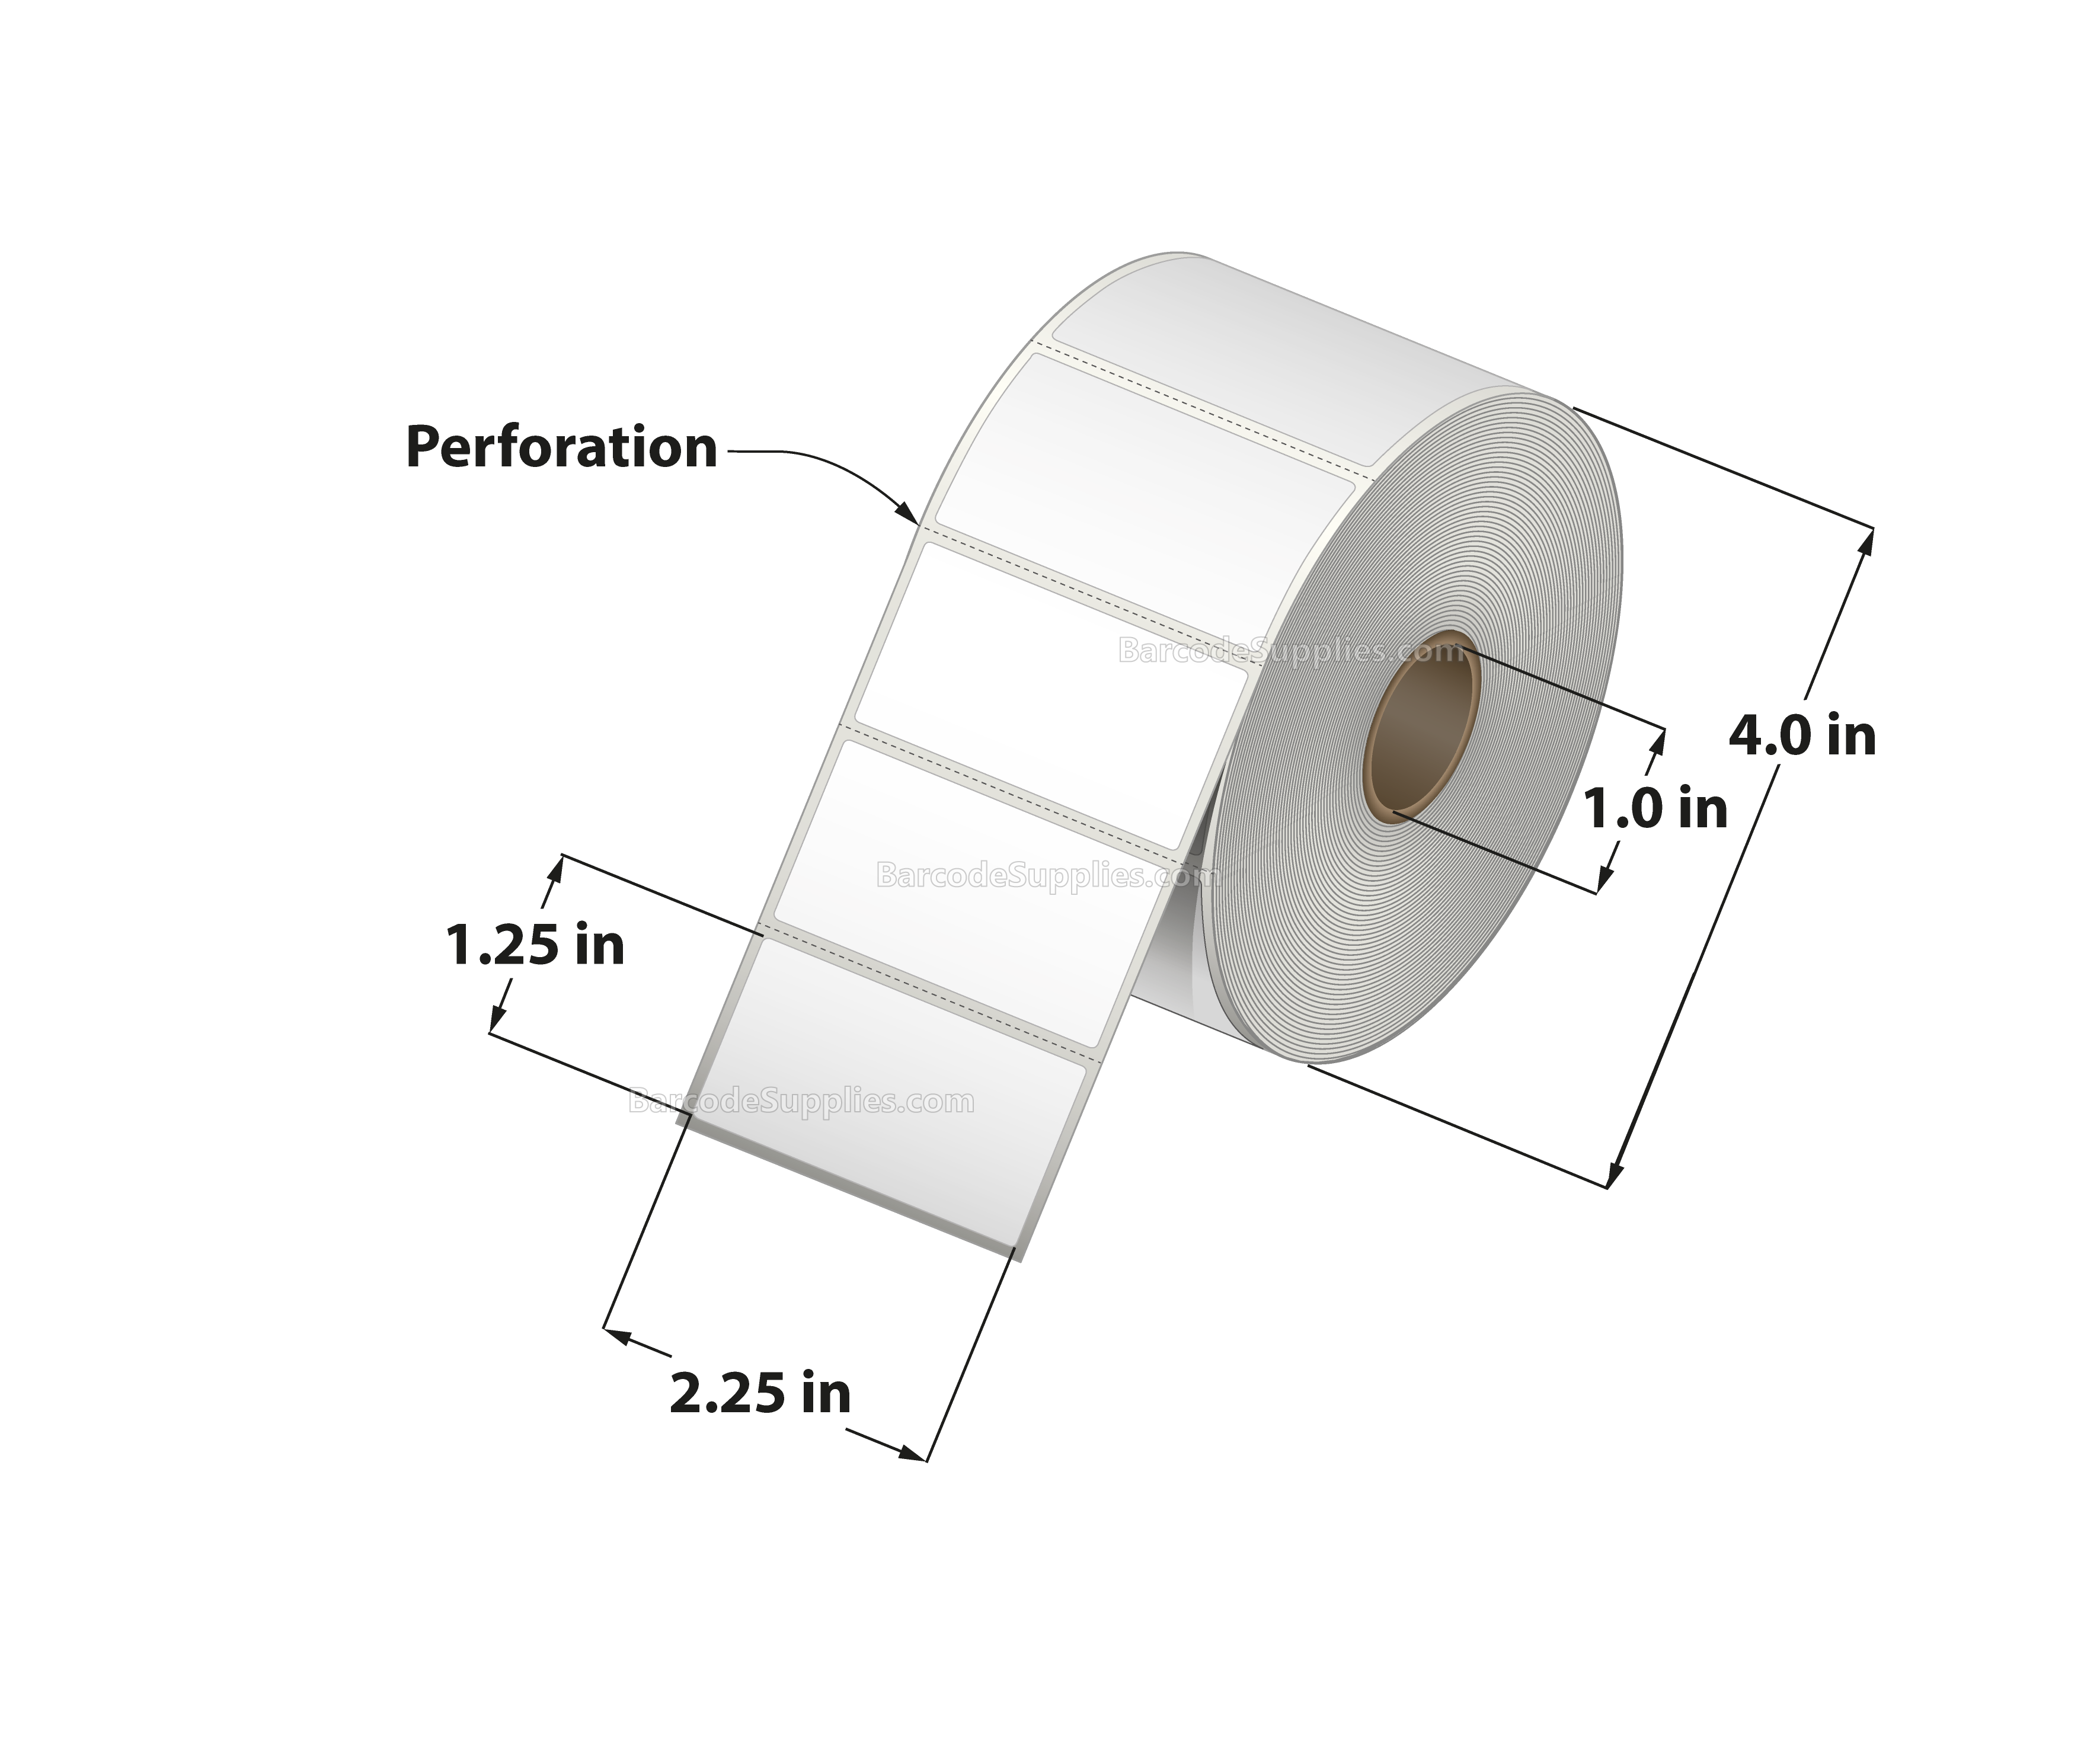 2.25 x 1.25 Thermal Transfer White Labels With Permanent Adhesive - Perforated - 1135 Labels Per Roll - Carton Of 12 Rolls - 13620 Labels Total - MPN: RT-225-125-1135-1 - BarcodeSource, Inc.